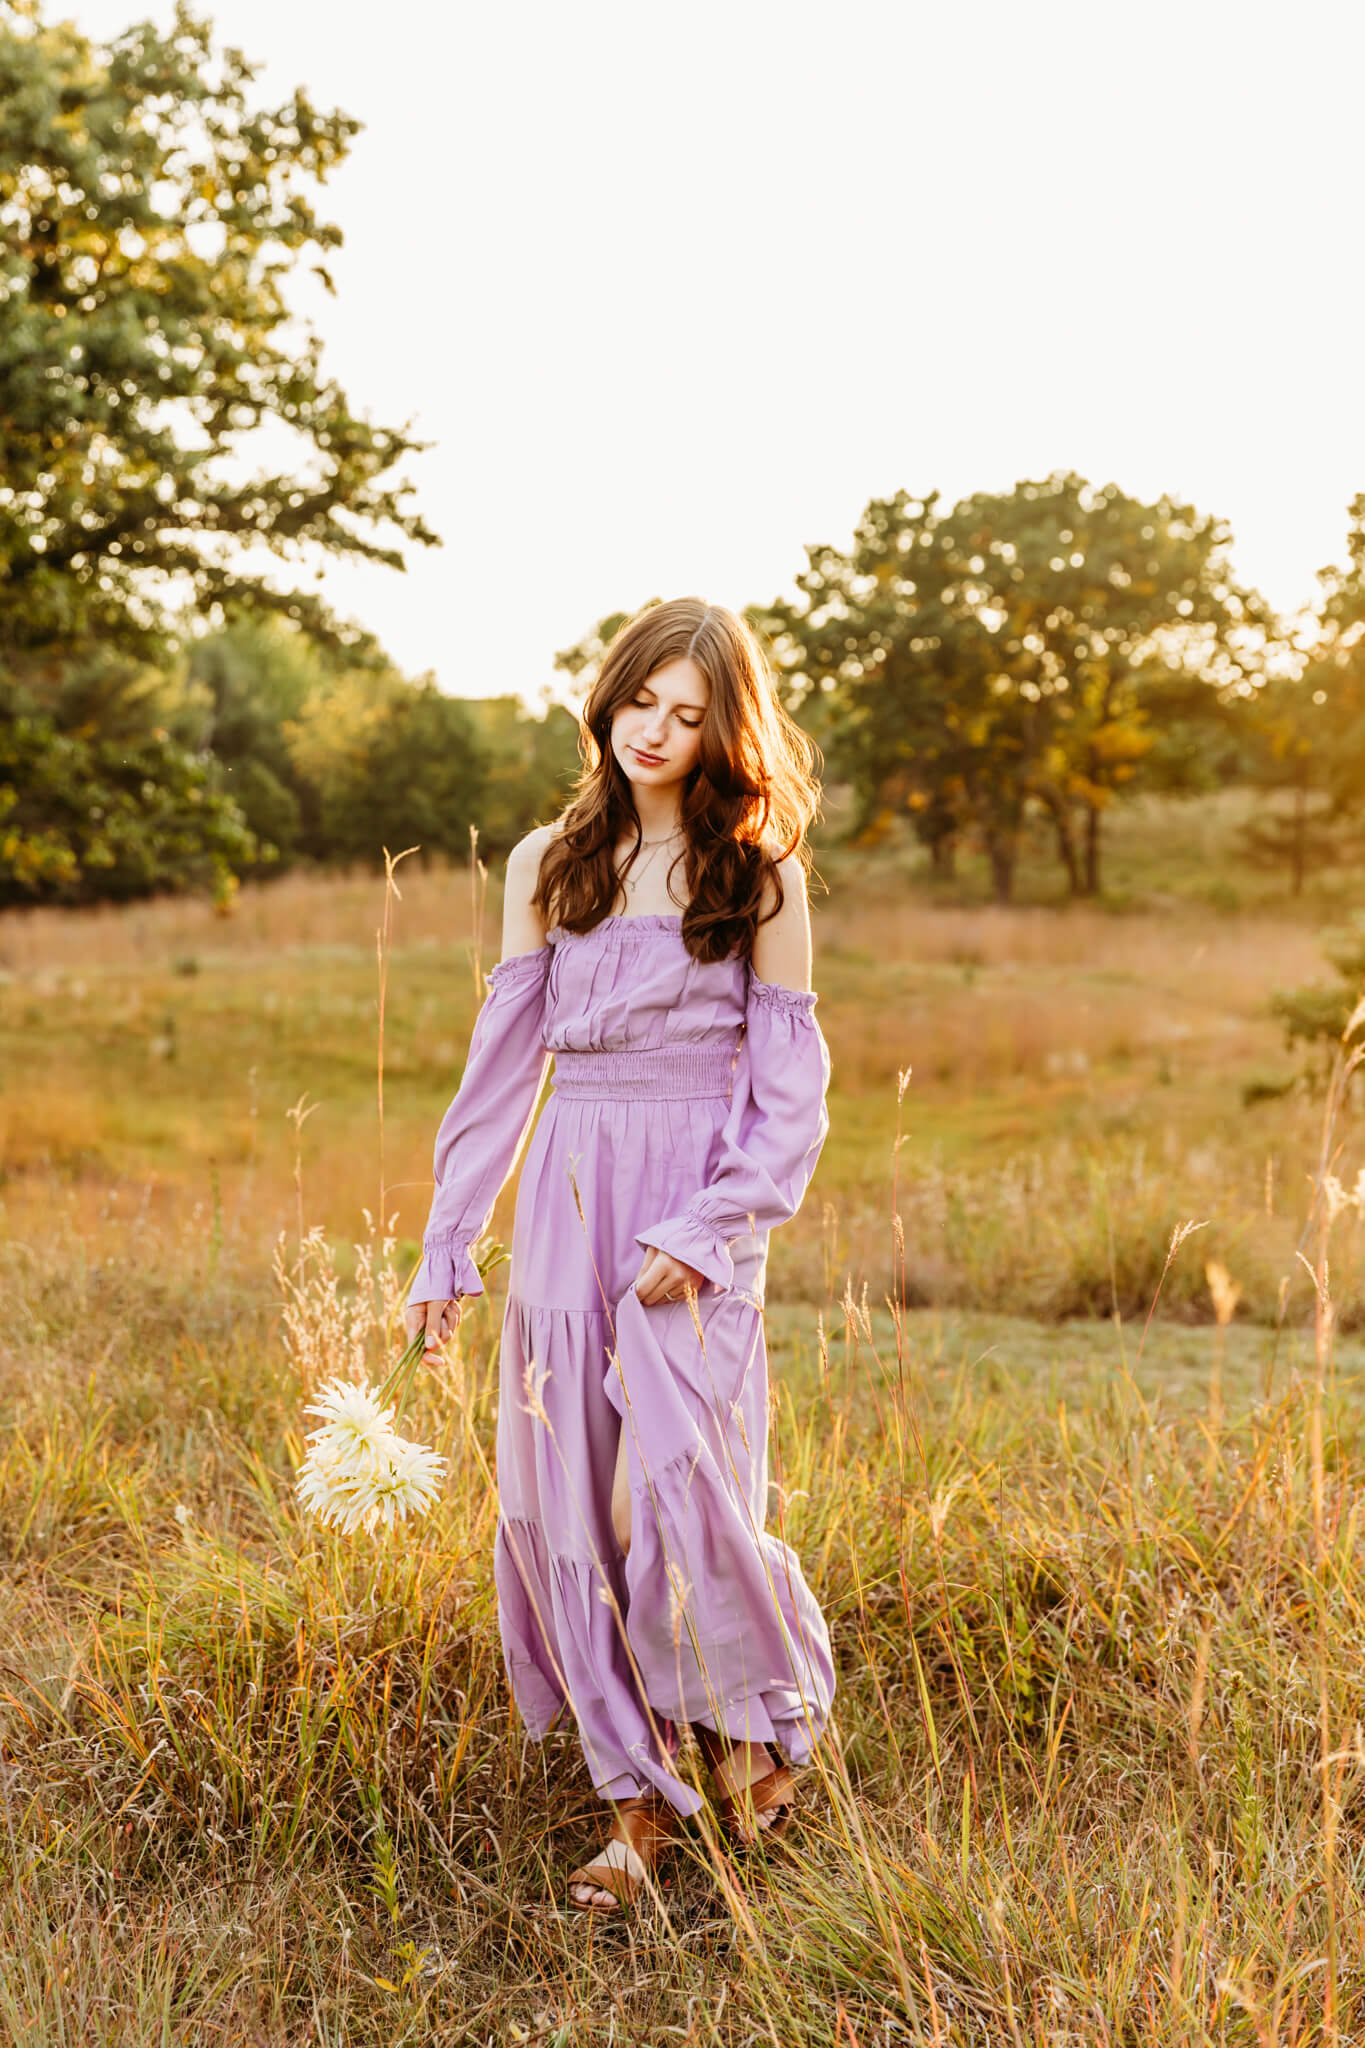 gorgeous teen girl in a flowy purple dress holding flowers and walking in a field at sunset